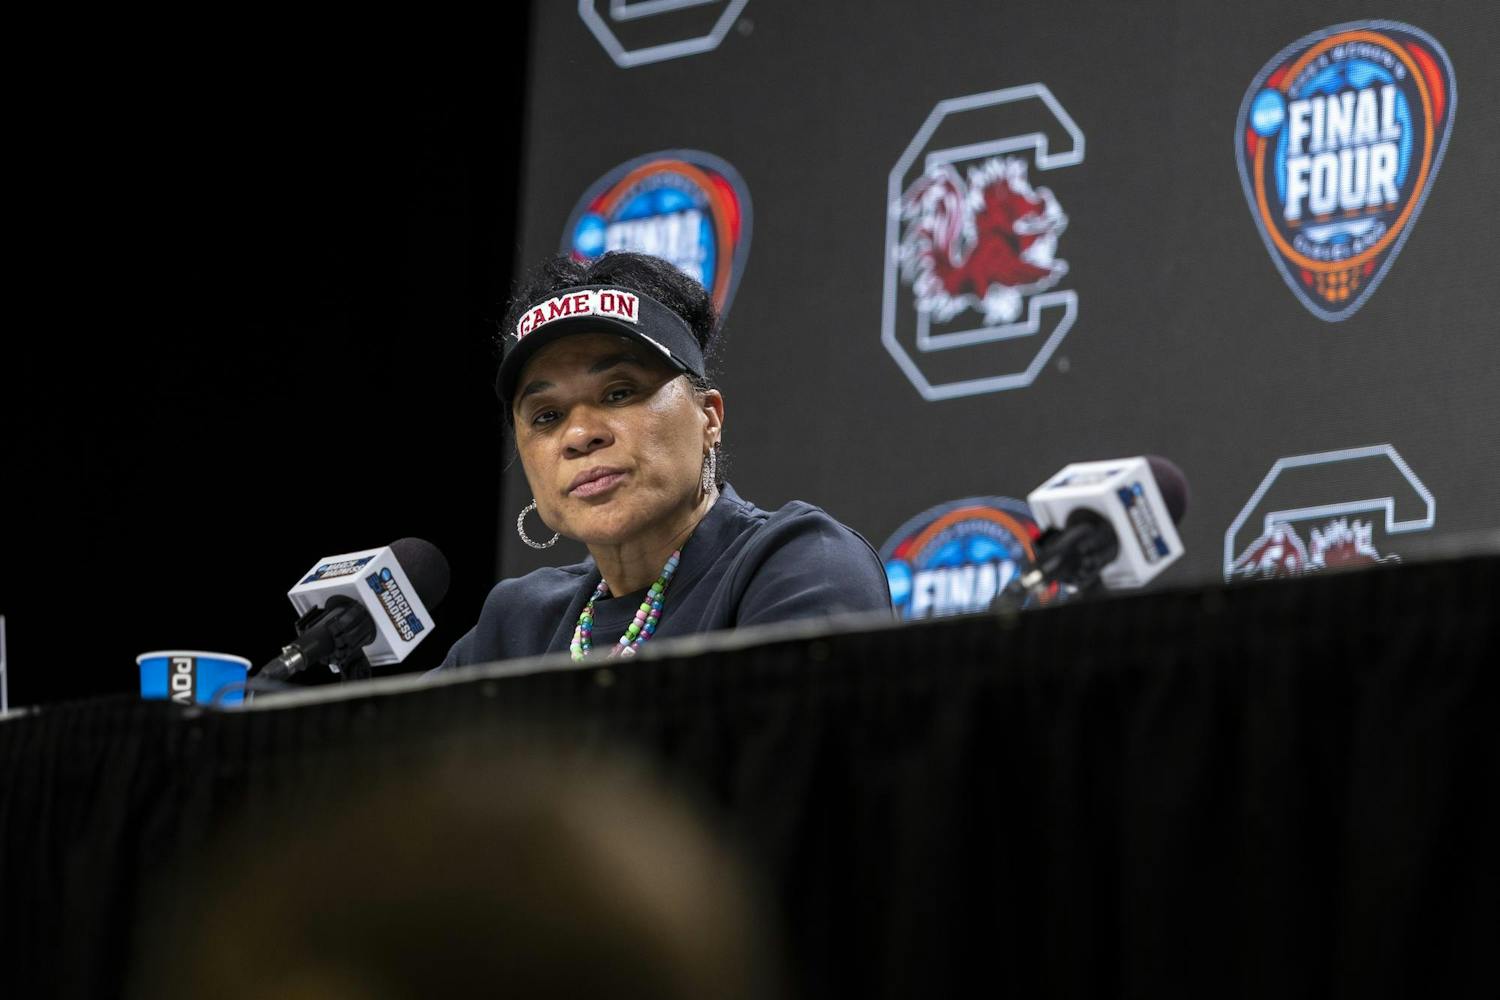 Gamecock women’s basketball head coach Dawn Staley answers questions during a press conference ahead of the NCAA women's basketball final in Cleveland, Ohio. Staley spoke about the team's preparation for the final game against the Iowa Hawkeyes, saying that the team is focused and prepared for the matchup.